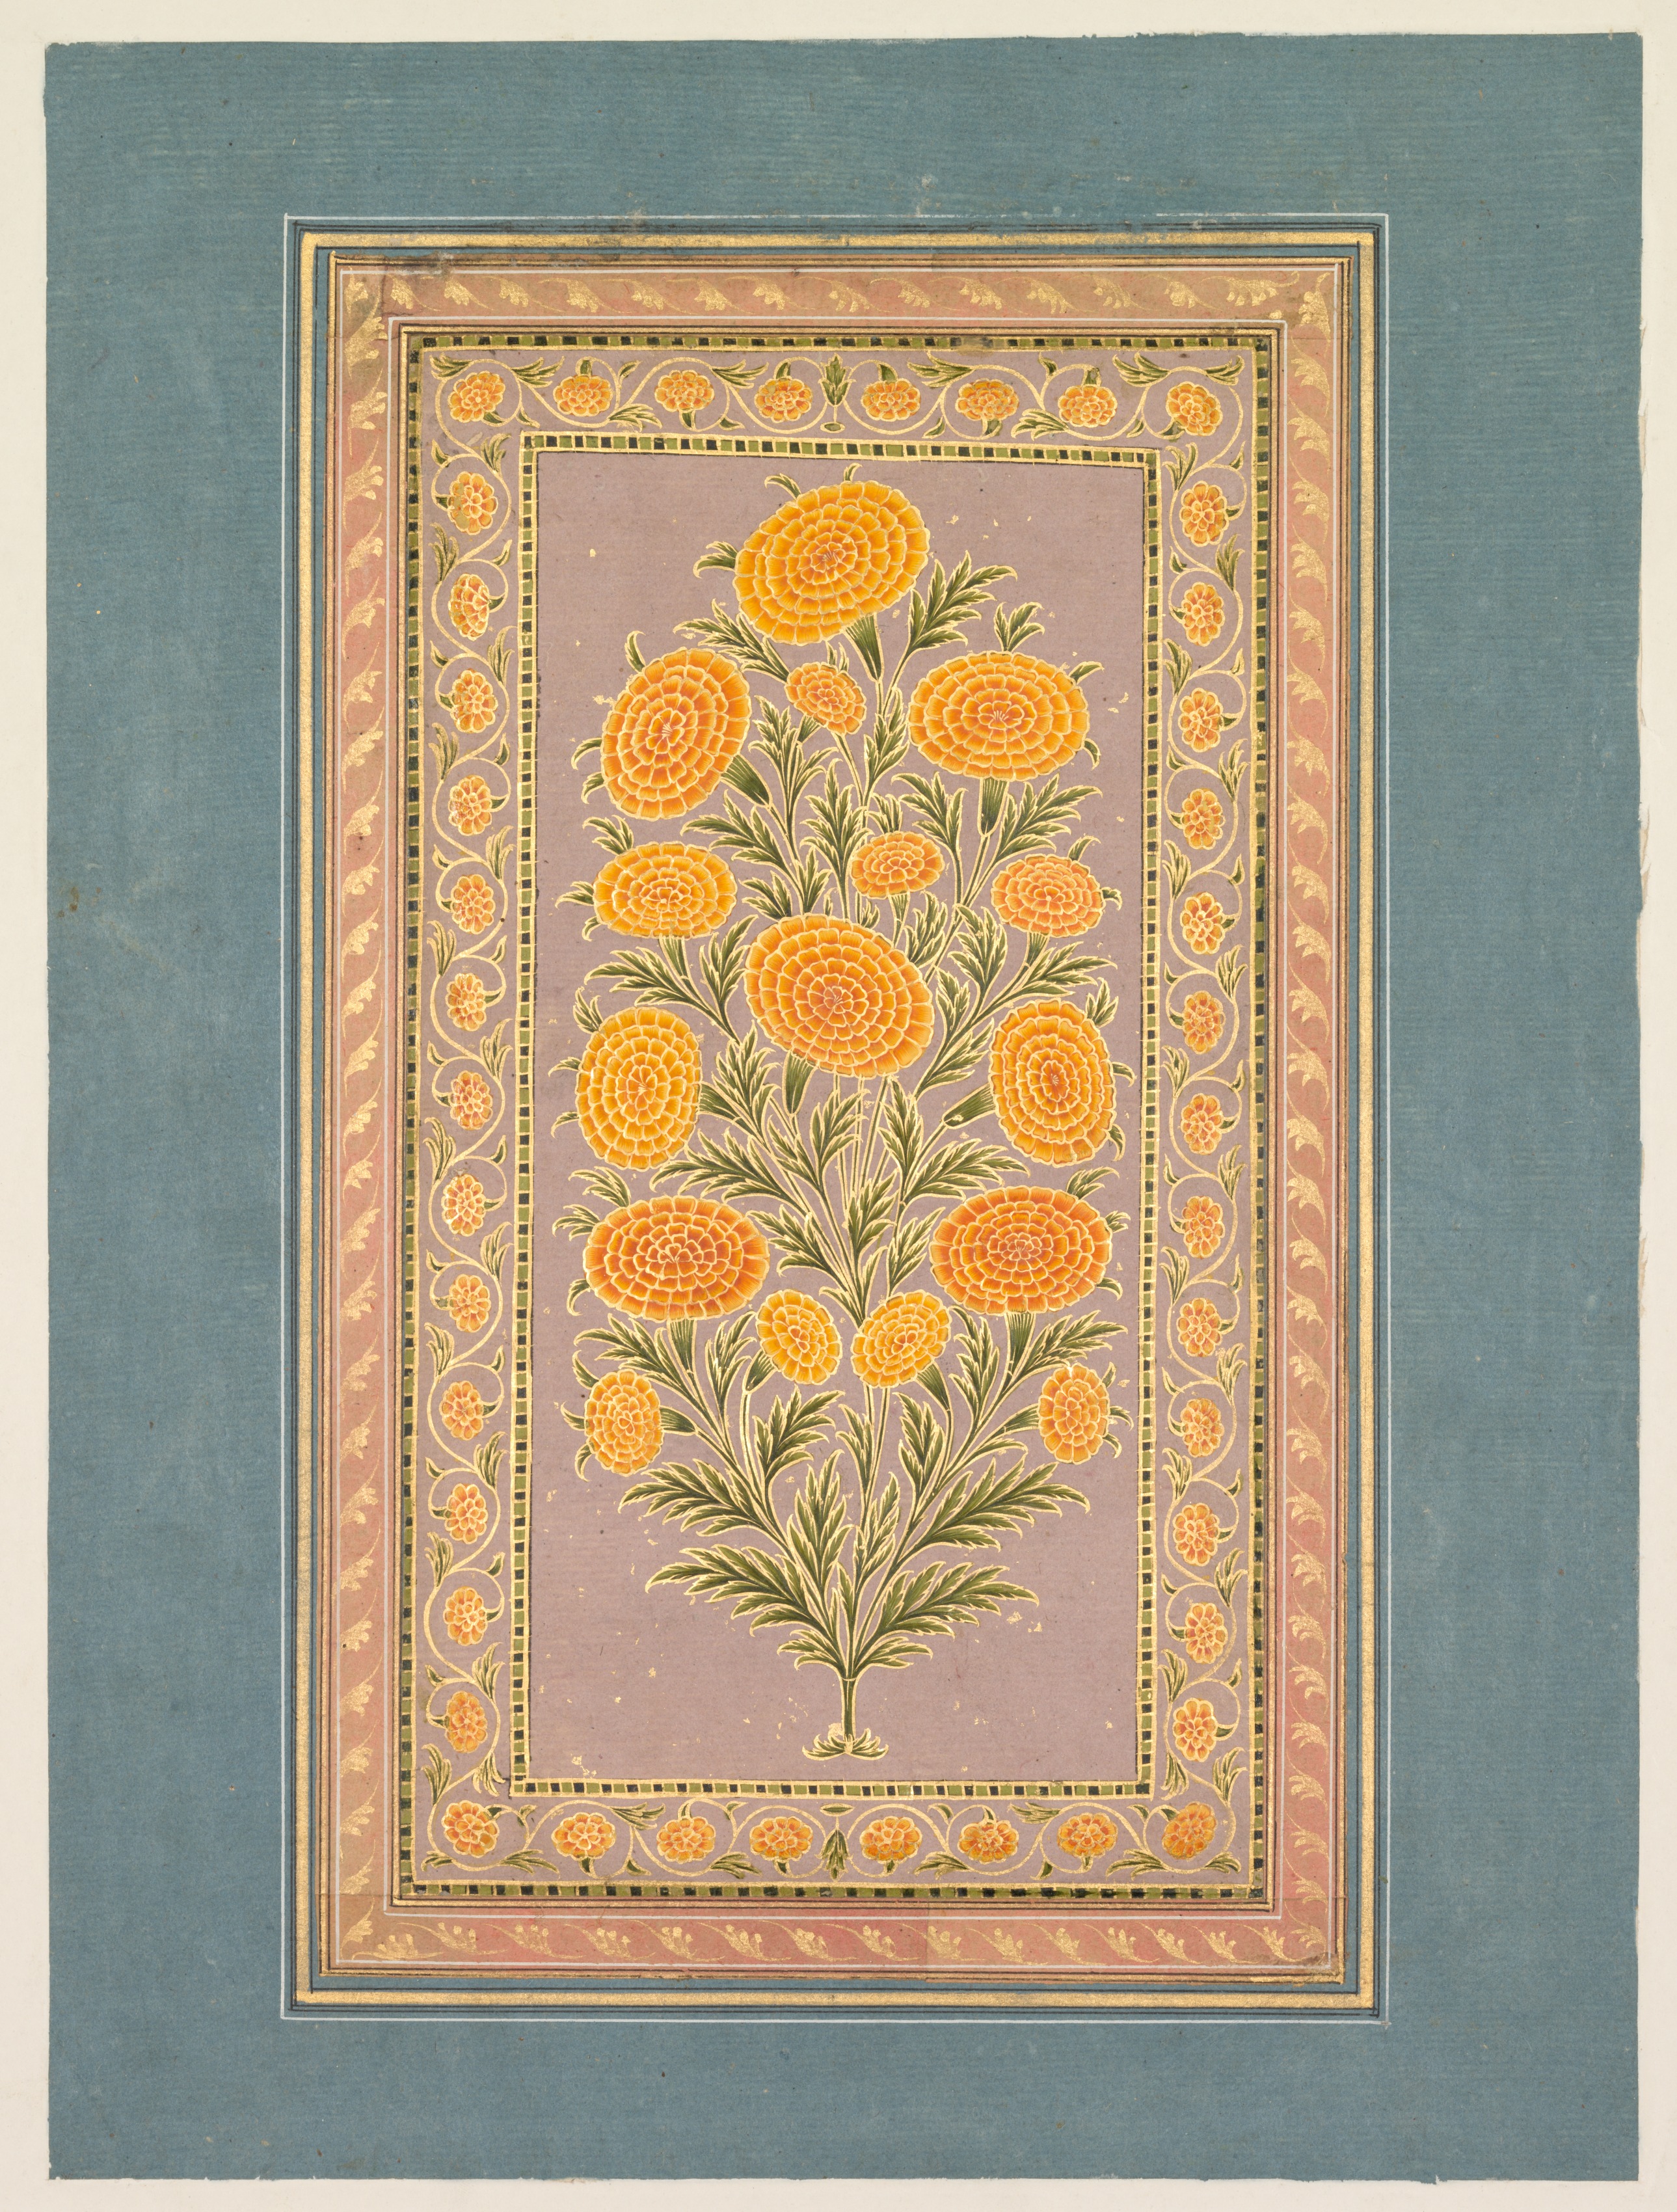 Flowering Marigold by Unknown Artist - c. 1765 - 33.1 x 24.9 cm Cleveland Museum of Art